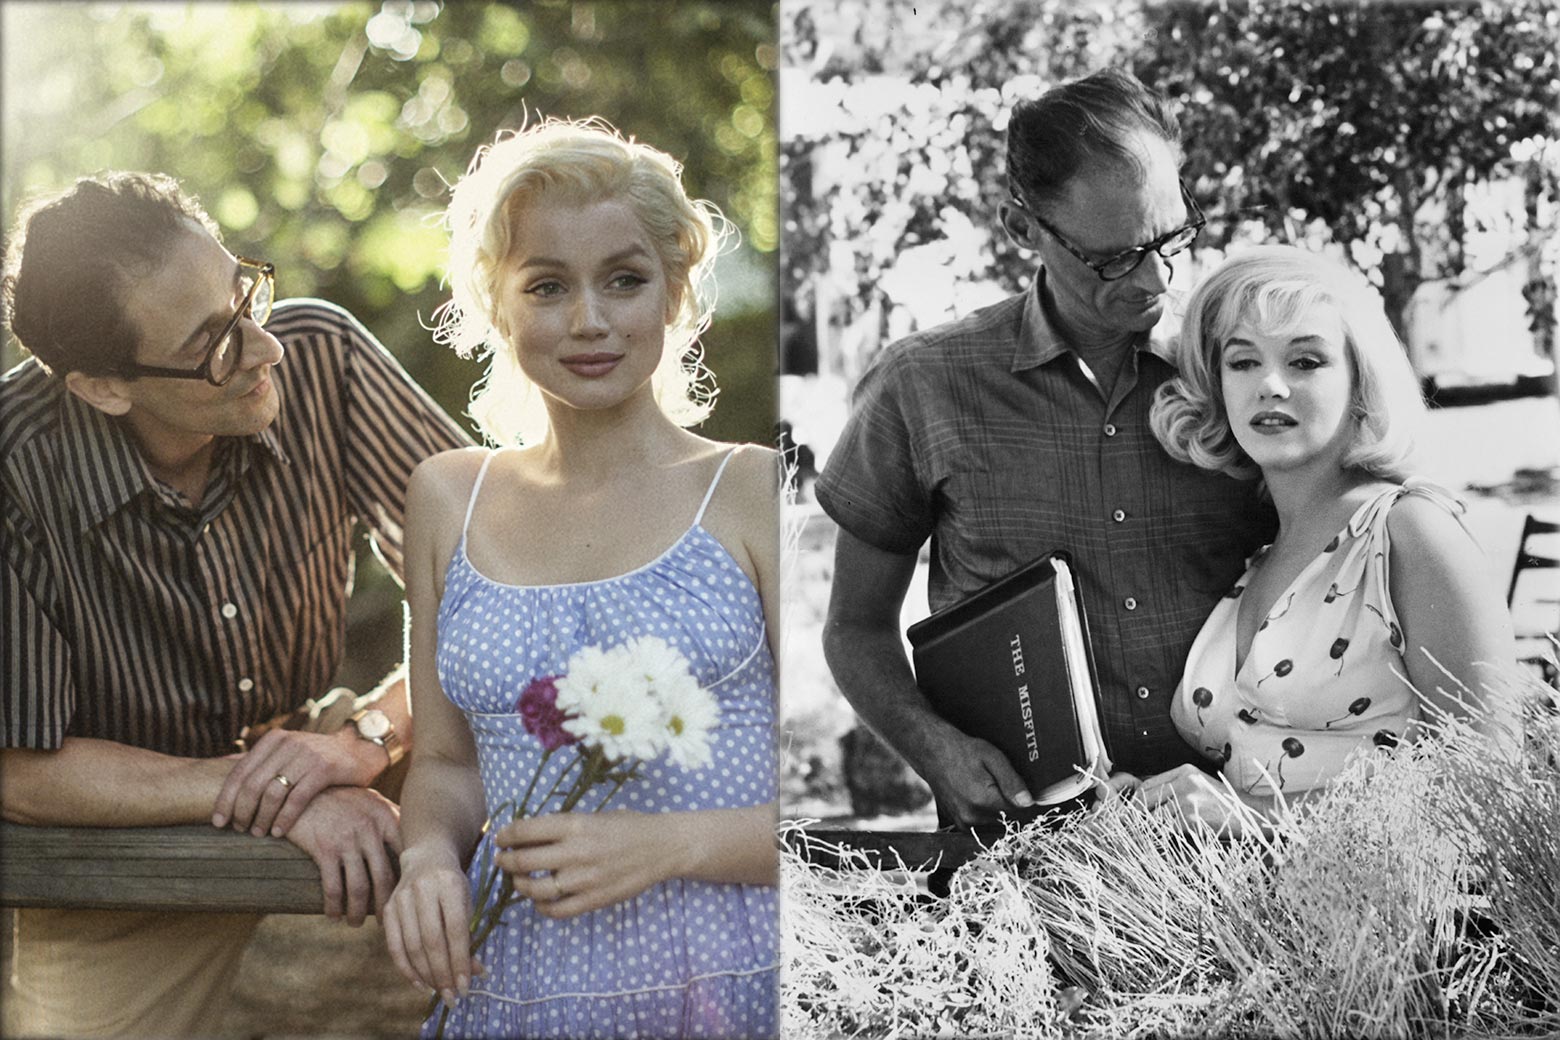 The actors playing Arthur Miller and Marilyn Monroe and the real people, both photographed outdoors among flowers.